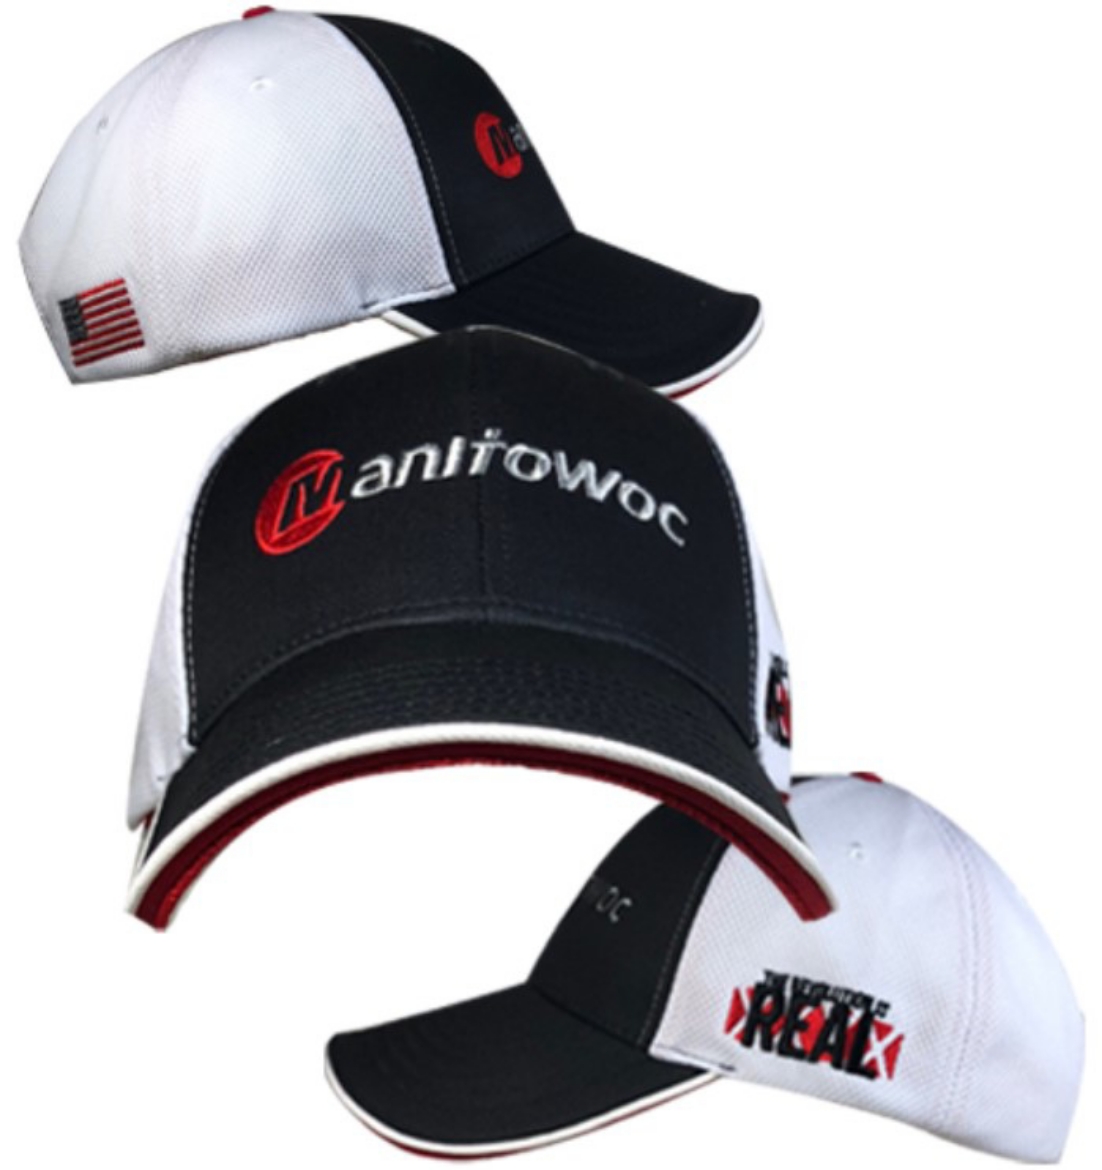 Picture of The Revolution is REAL Manitowoc Cap